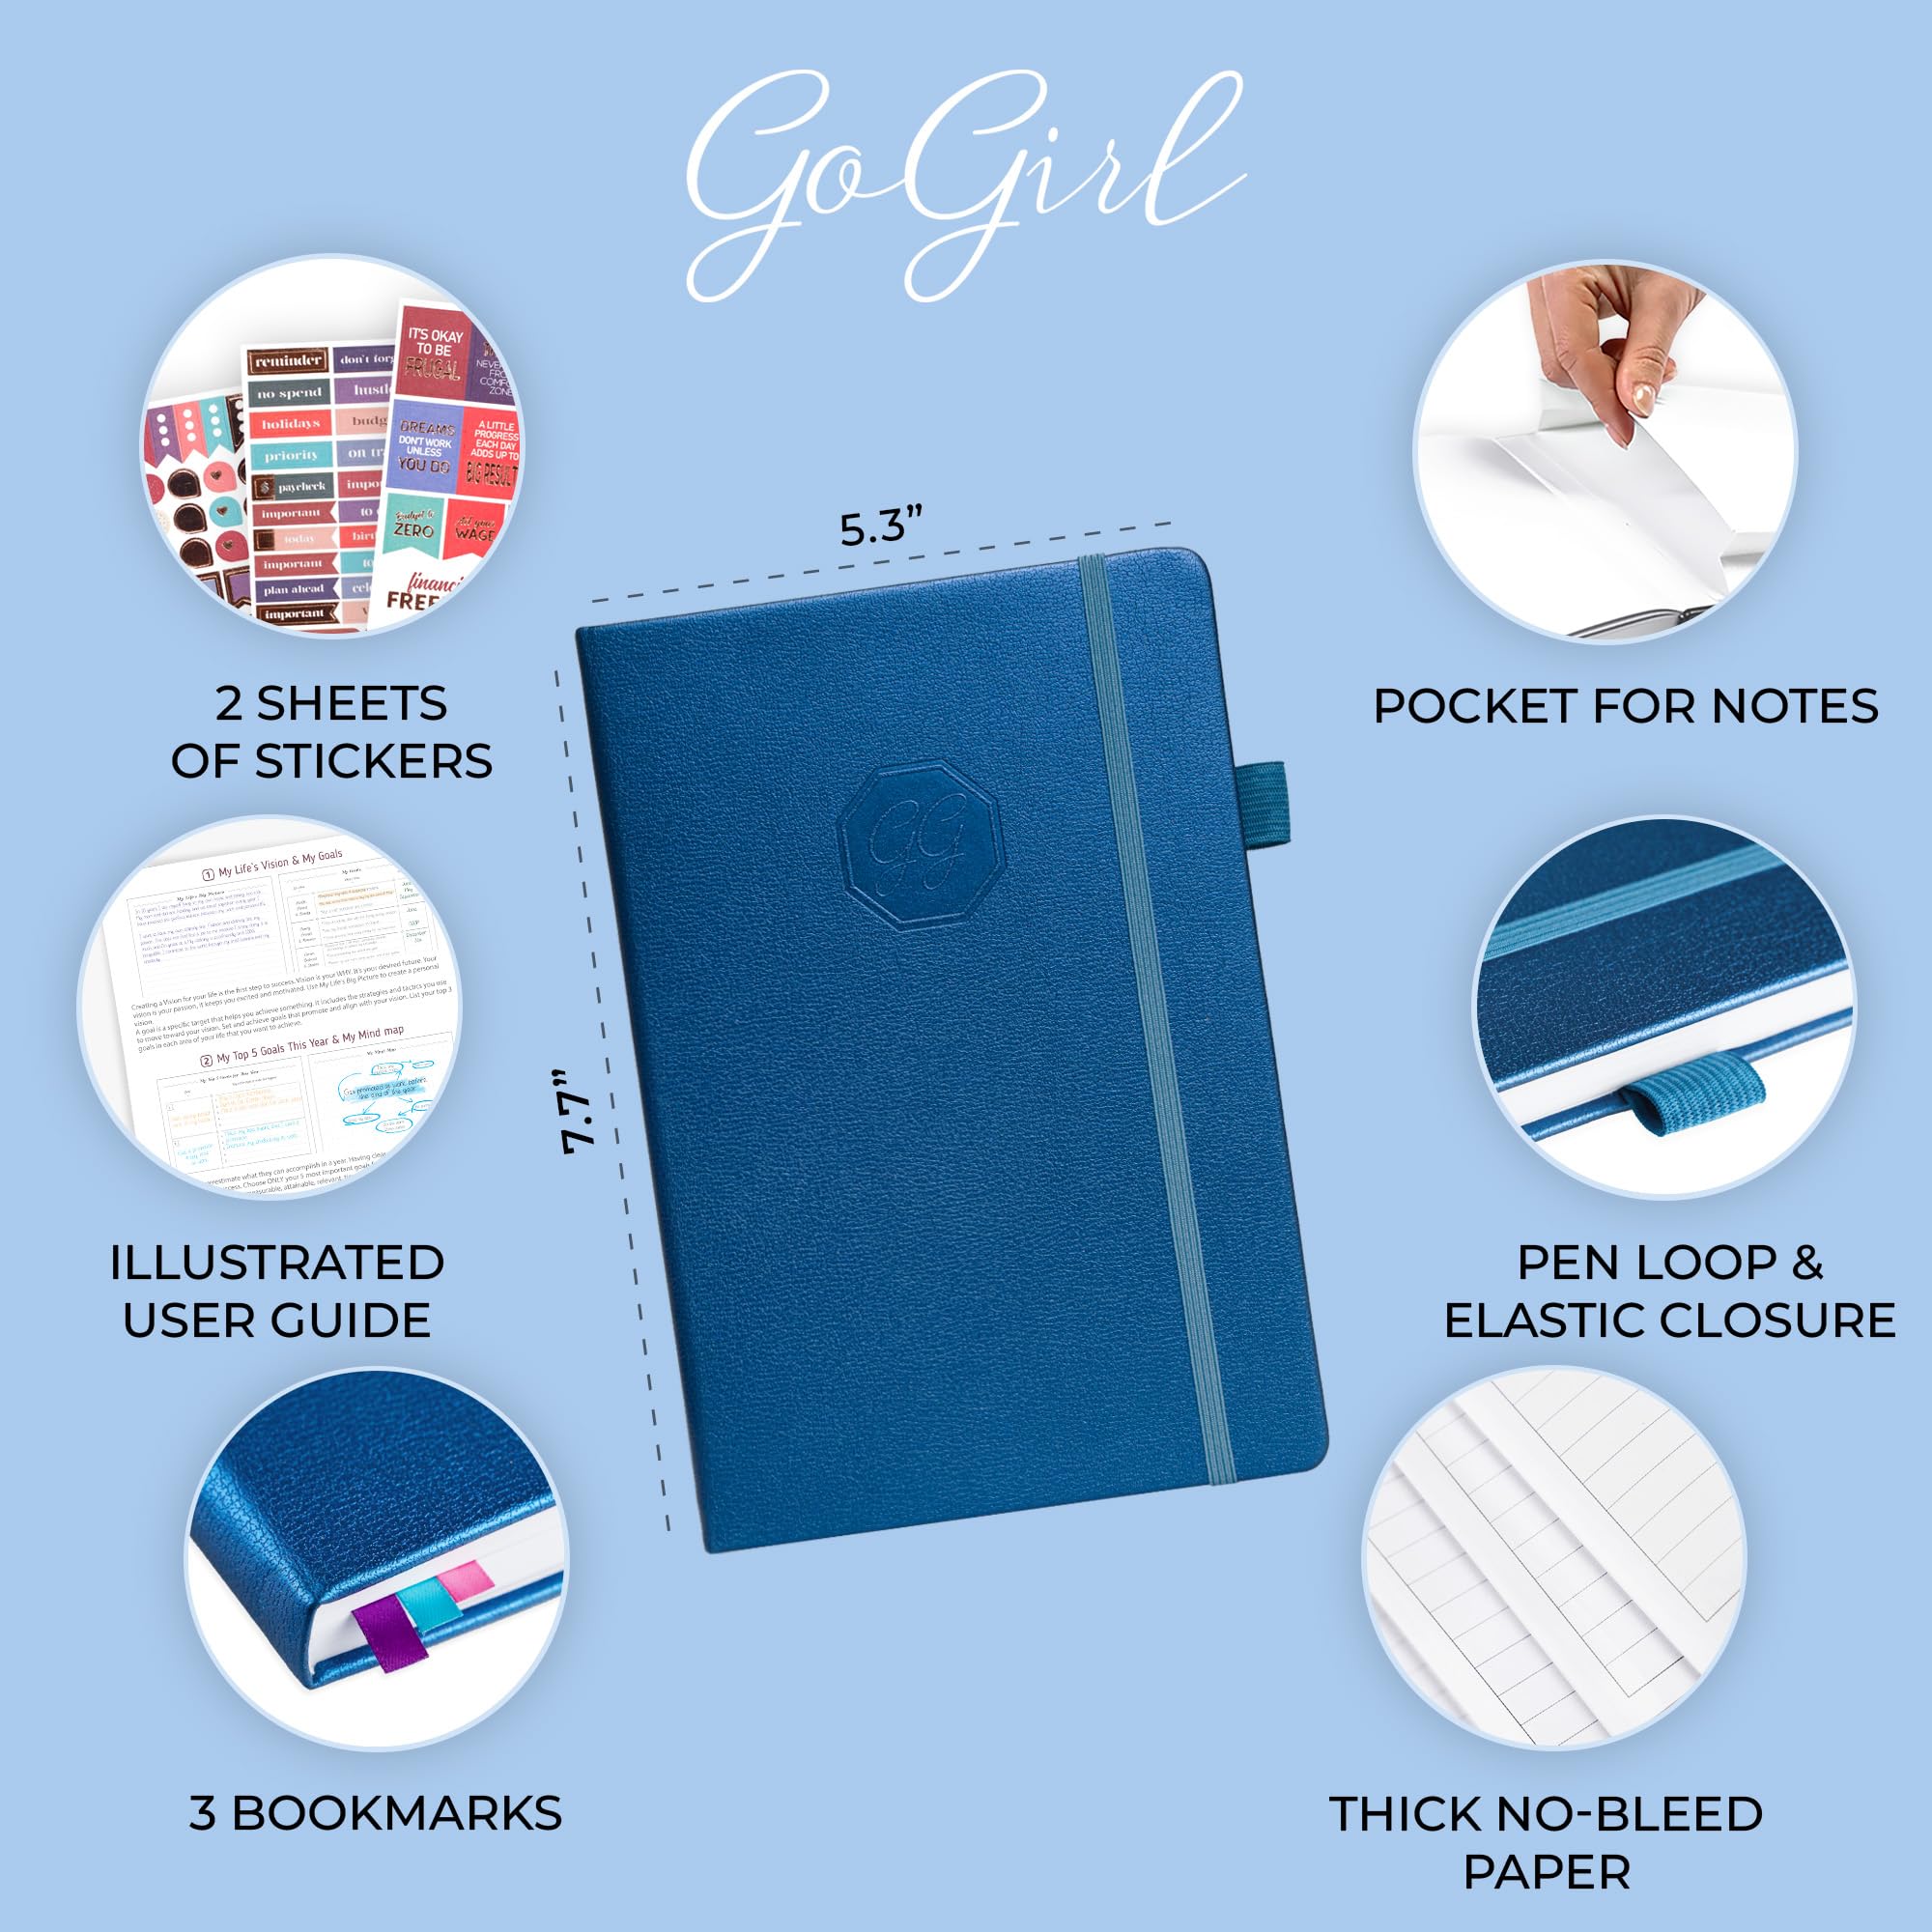 GoGirl Weekly Schedule Planner – Hourly Work & Life Planner with Time Slots – Vertical Agenda Organizer for Daily Productivity, A5 (Mystic Blue)